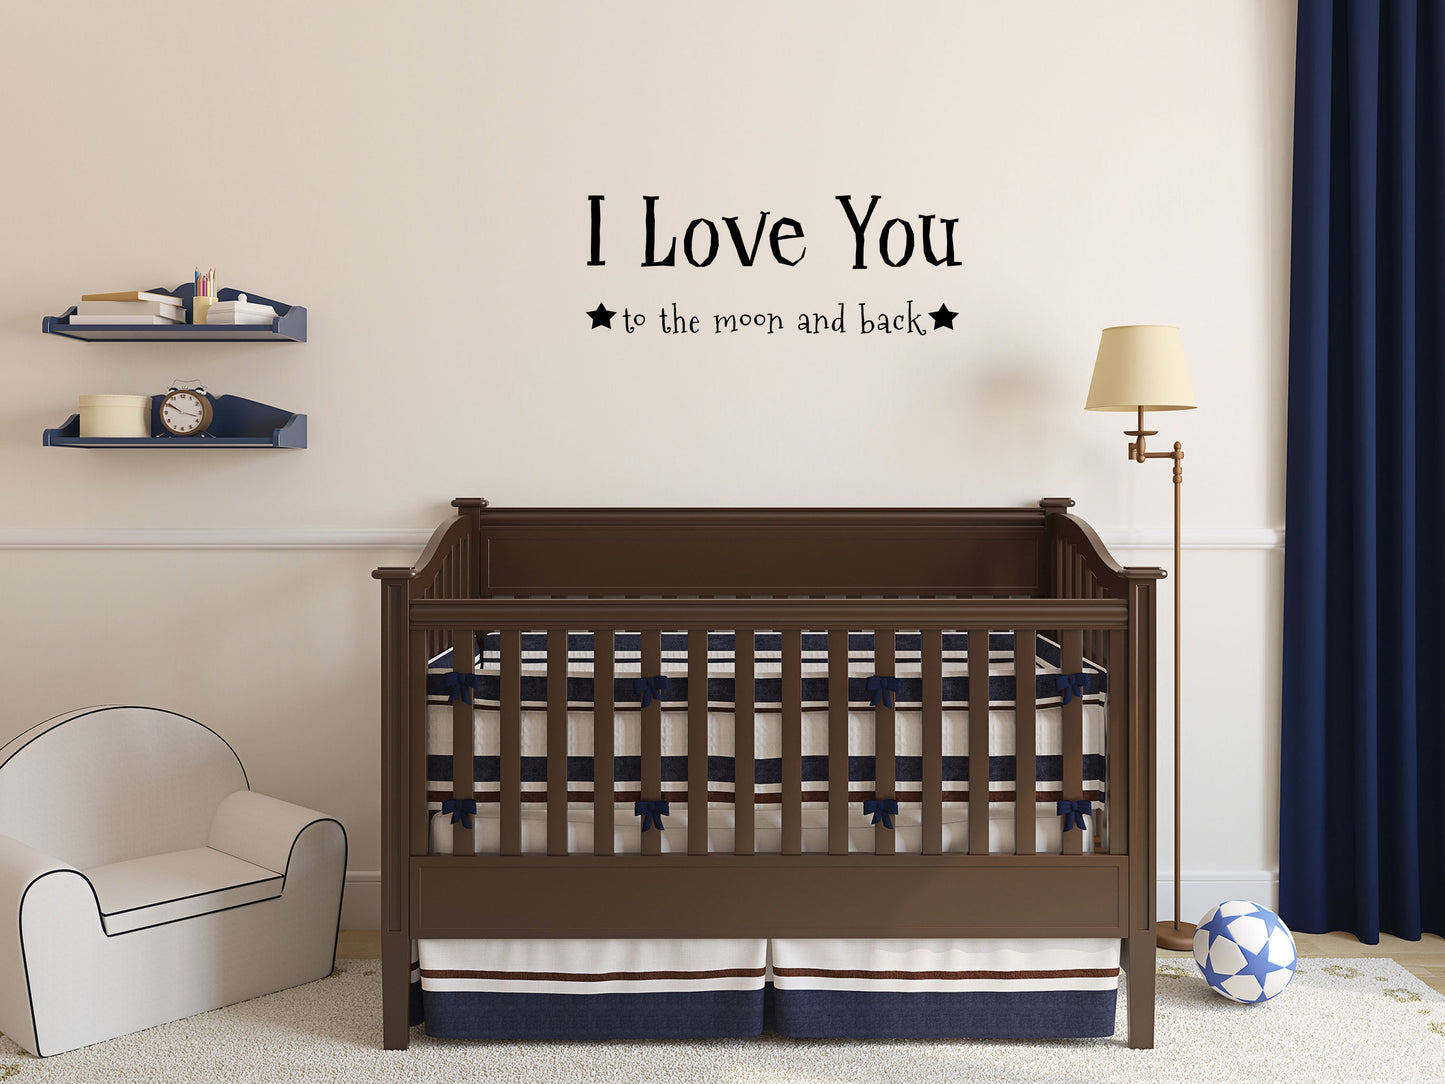 I Love You To The Moon and Back Vinyl Wall Decal Inspirational Wall Signs 